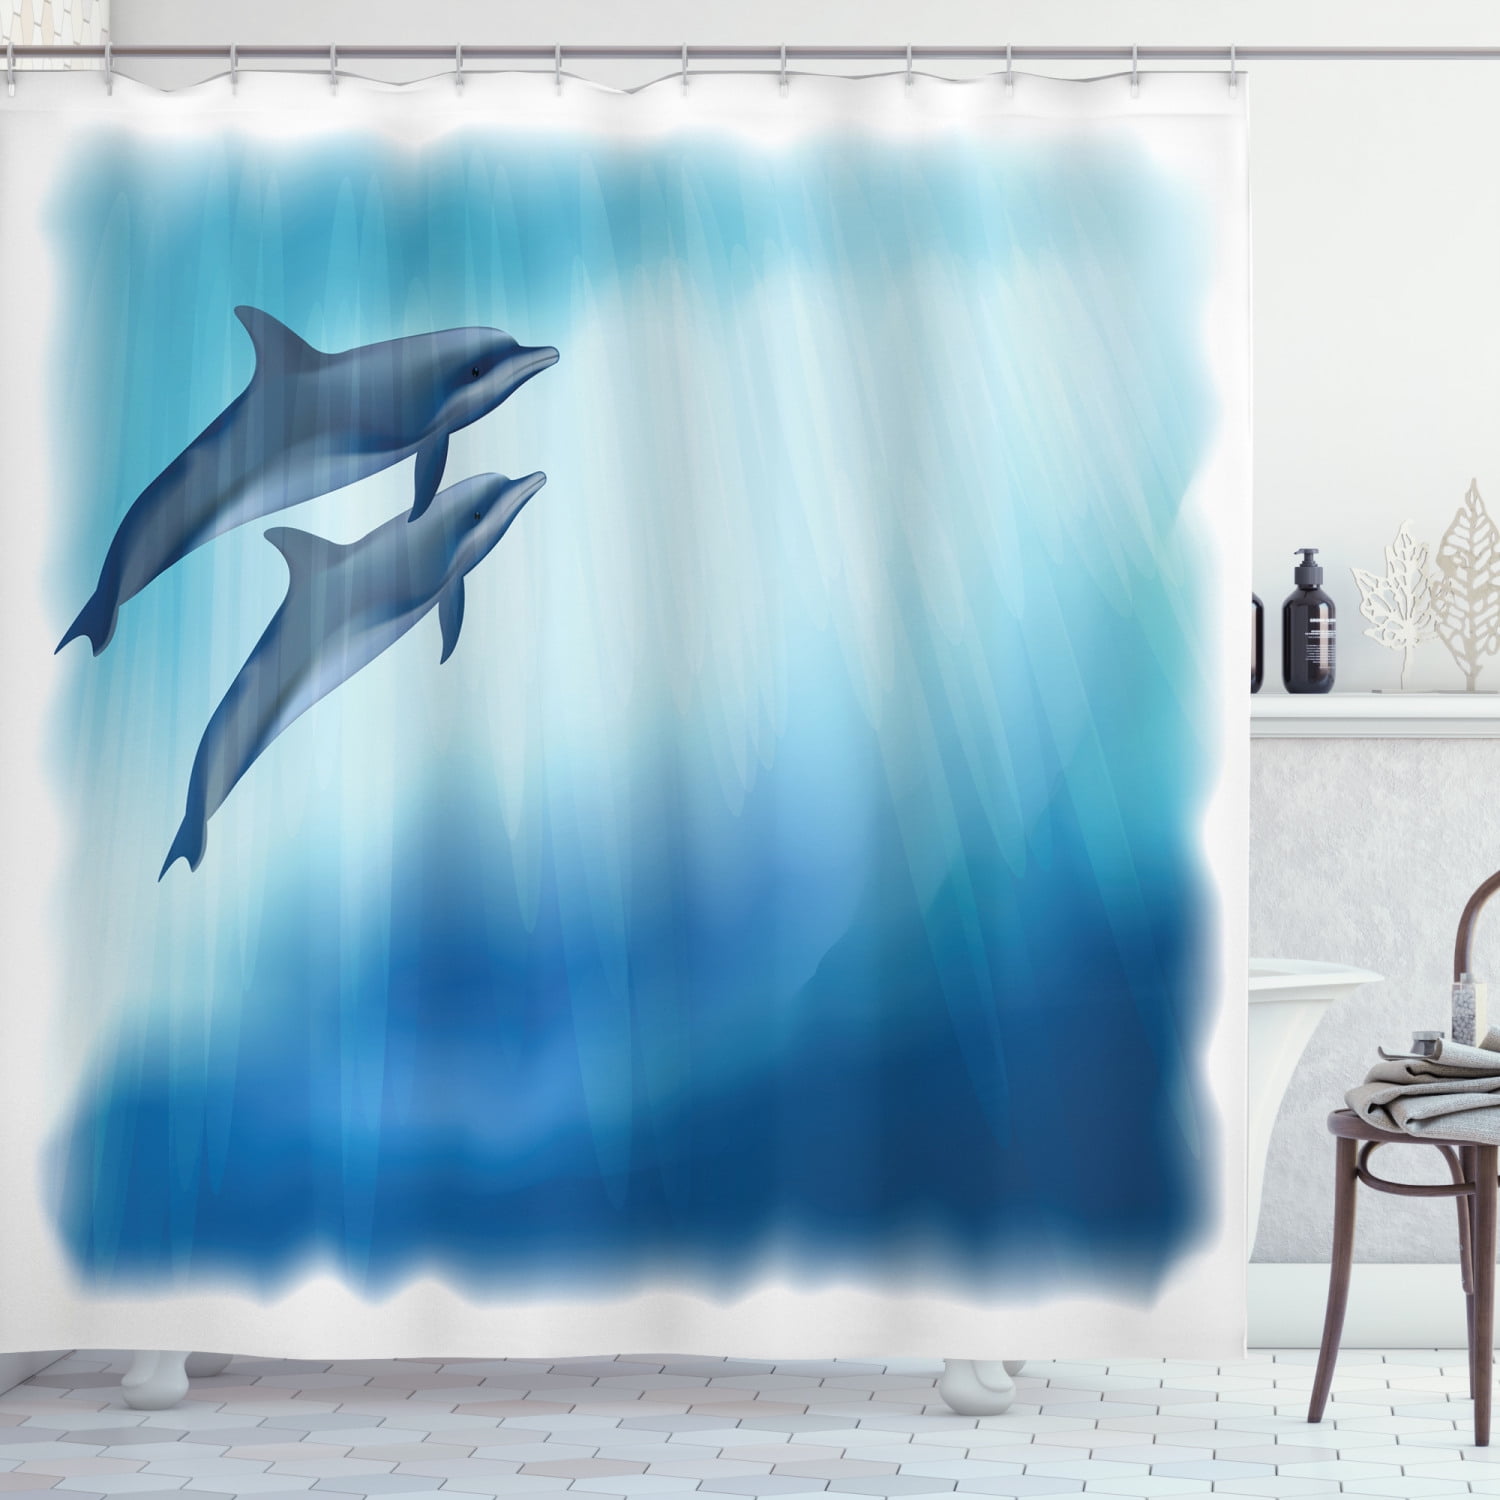 72x72'' A Pair Of Dolphins Dancing Waterproof Fabric Bathroom Shower Curtain 